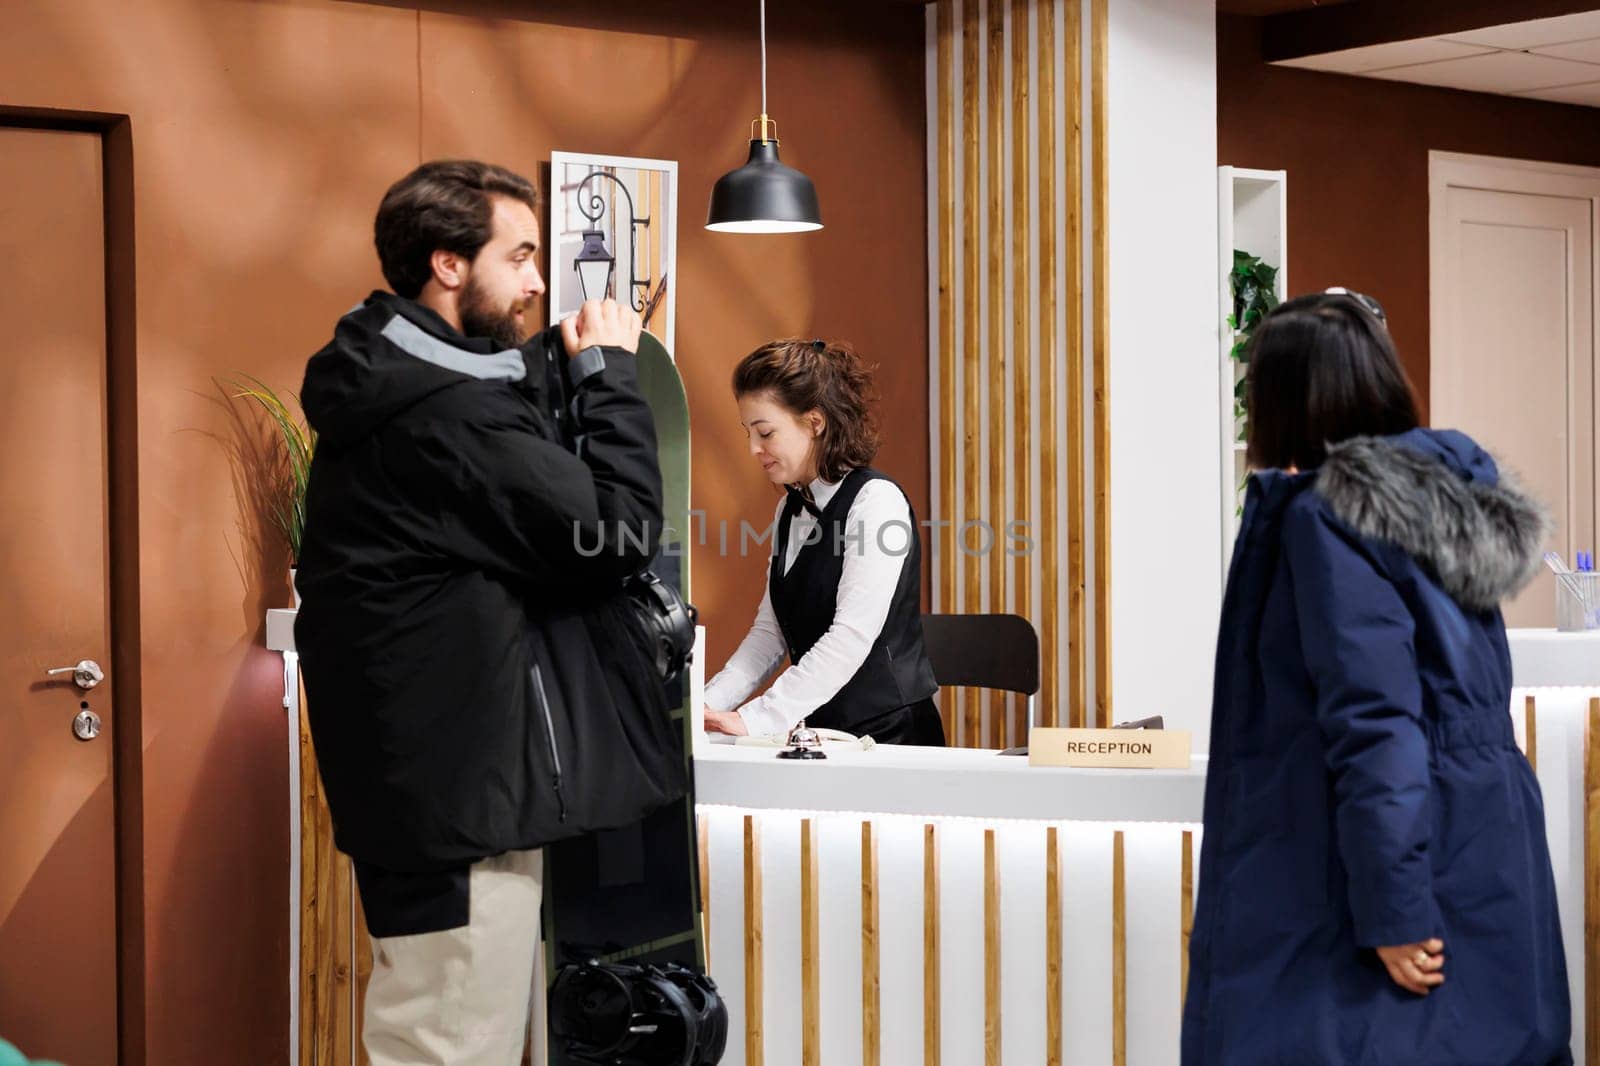 Tourists being assisted by receptionist by DCStudio